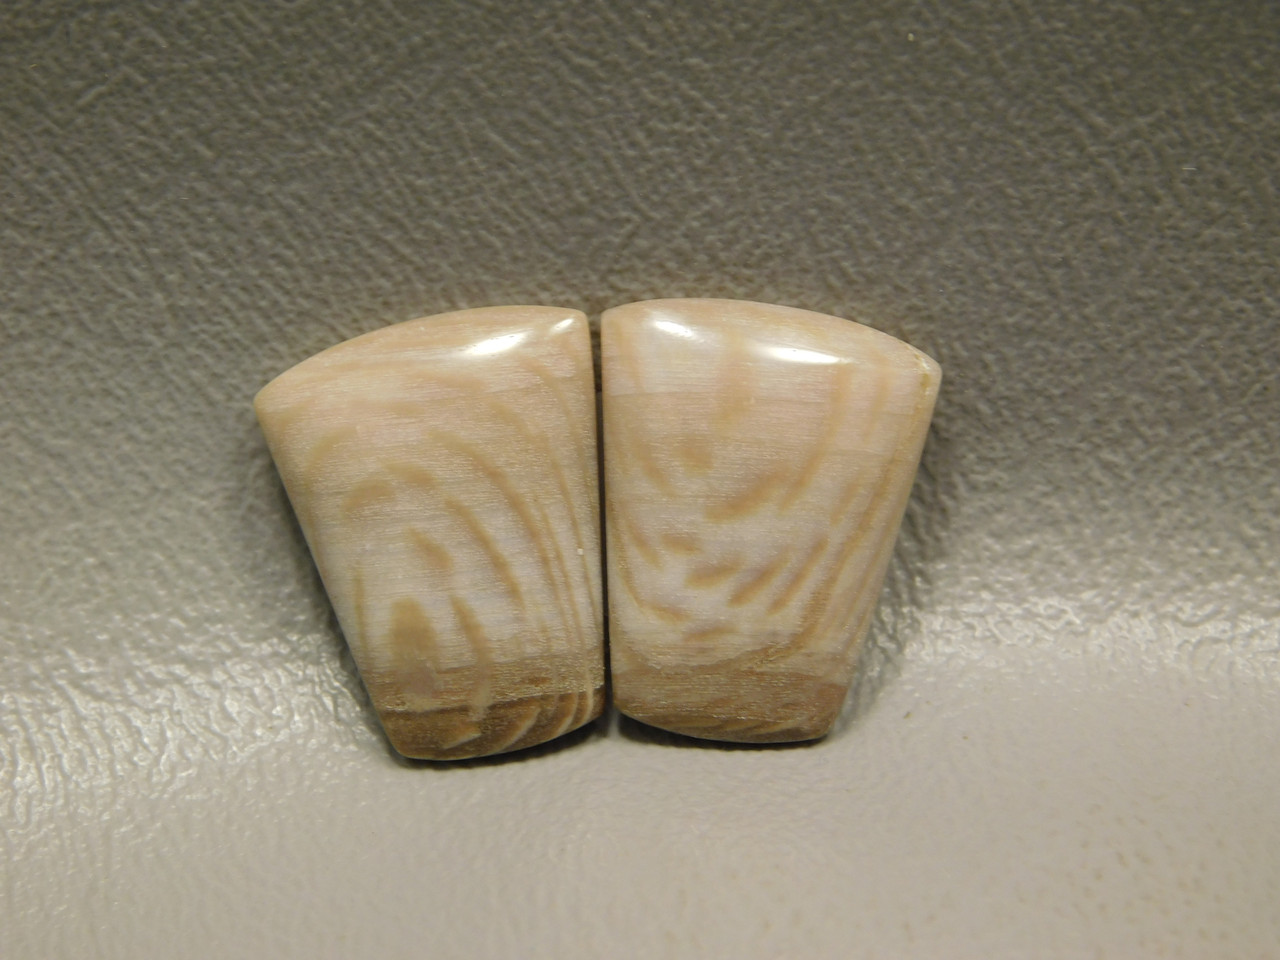 Badger Pocket Sycamore Wood Matched Pair Cabochons Stones #24